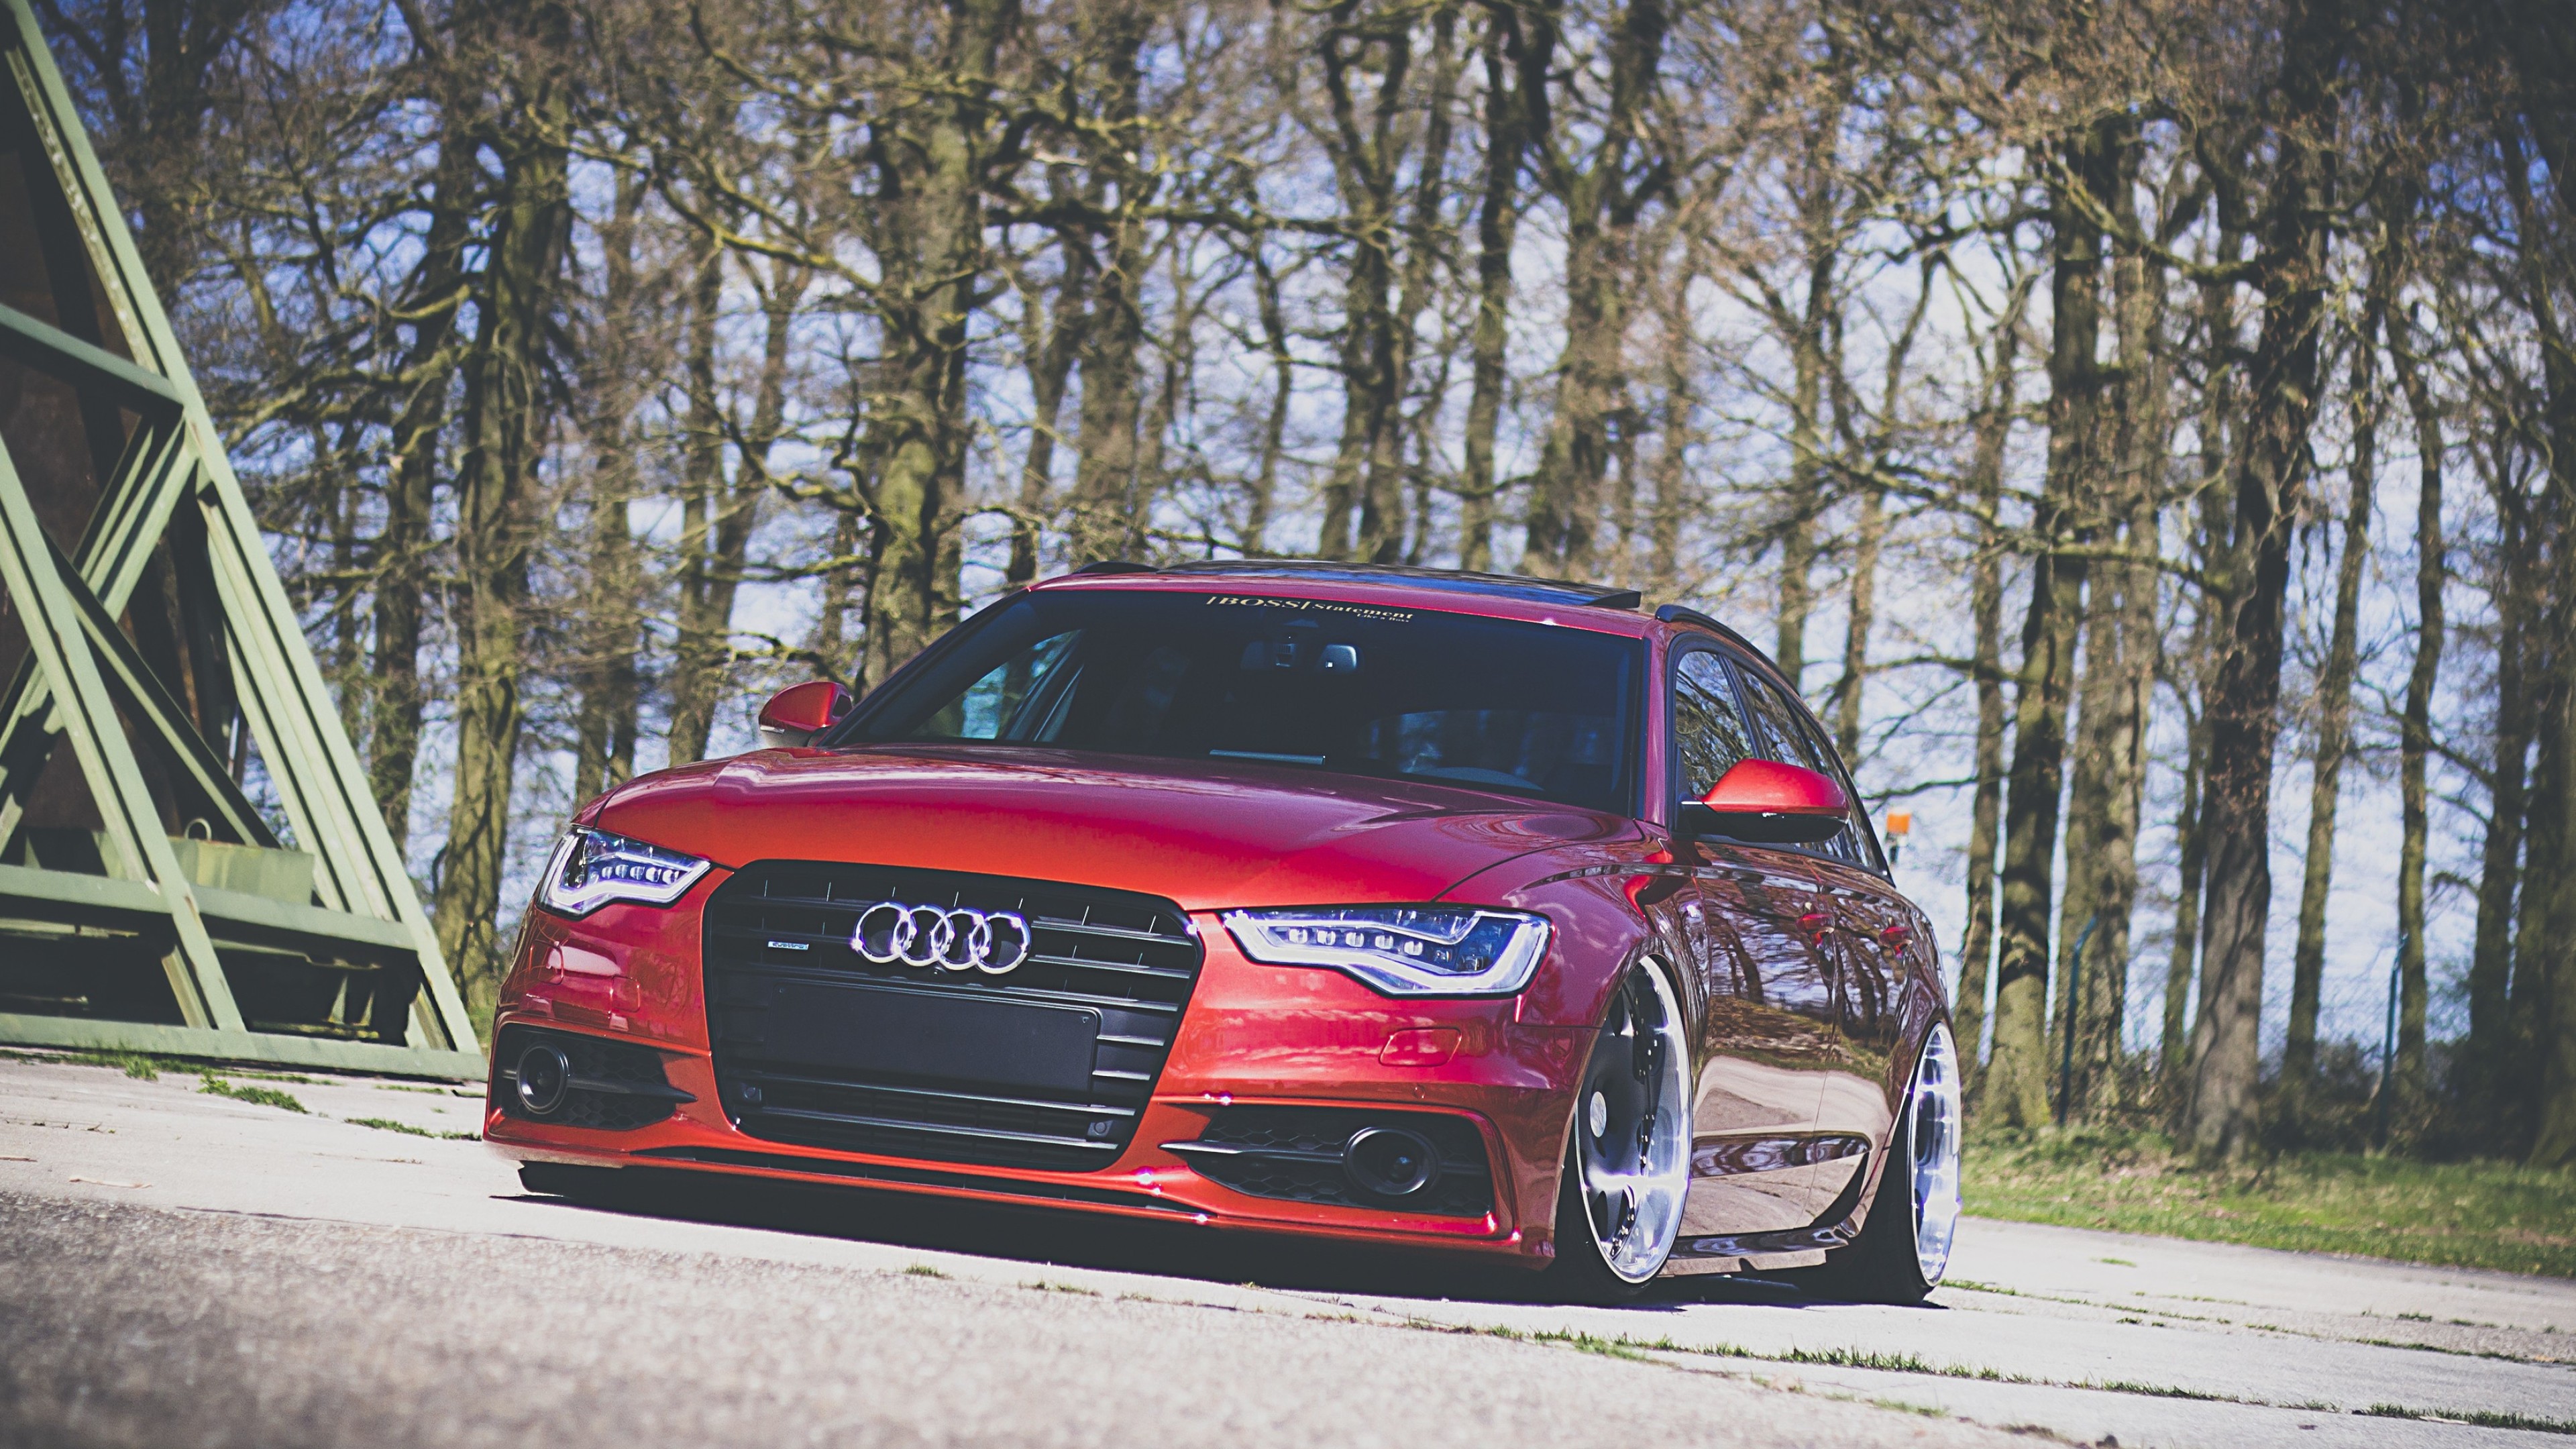 Audi S4 Audi A4 Stance Car Red Cars Vehicle Wallpapers Hd Desktop And Mobile Backgrounds